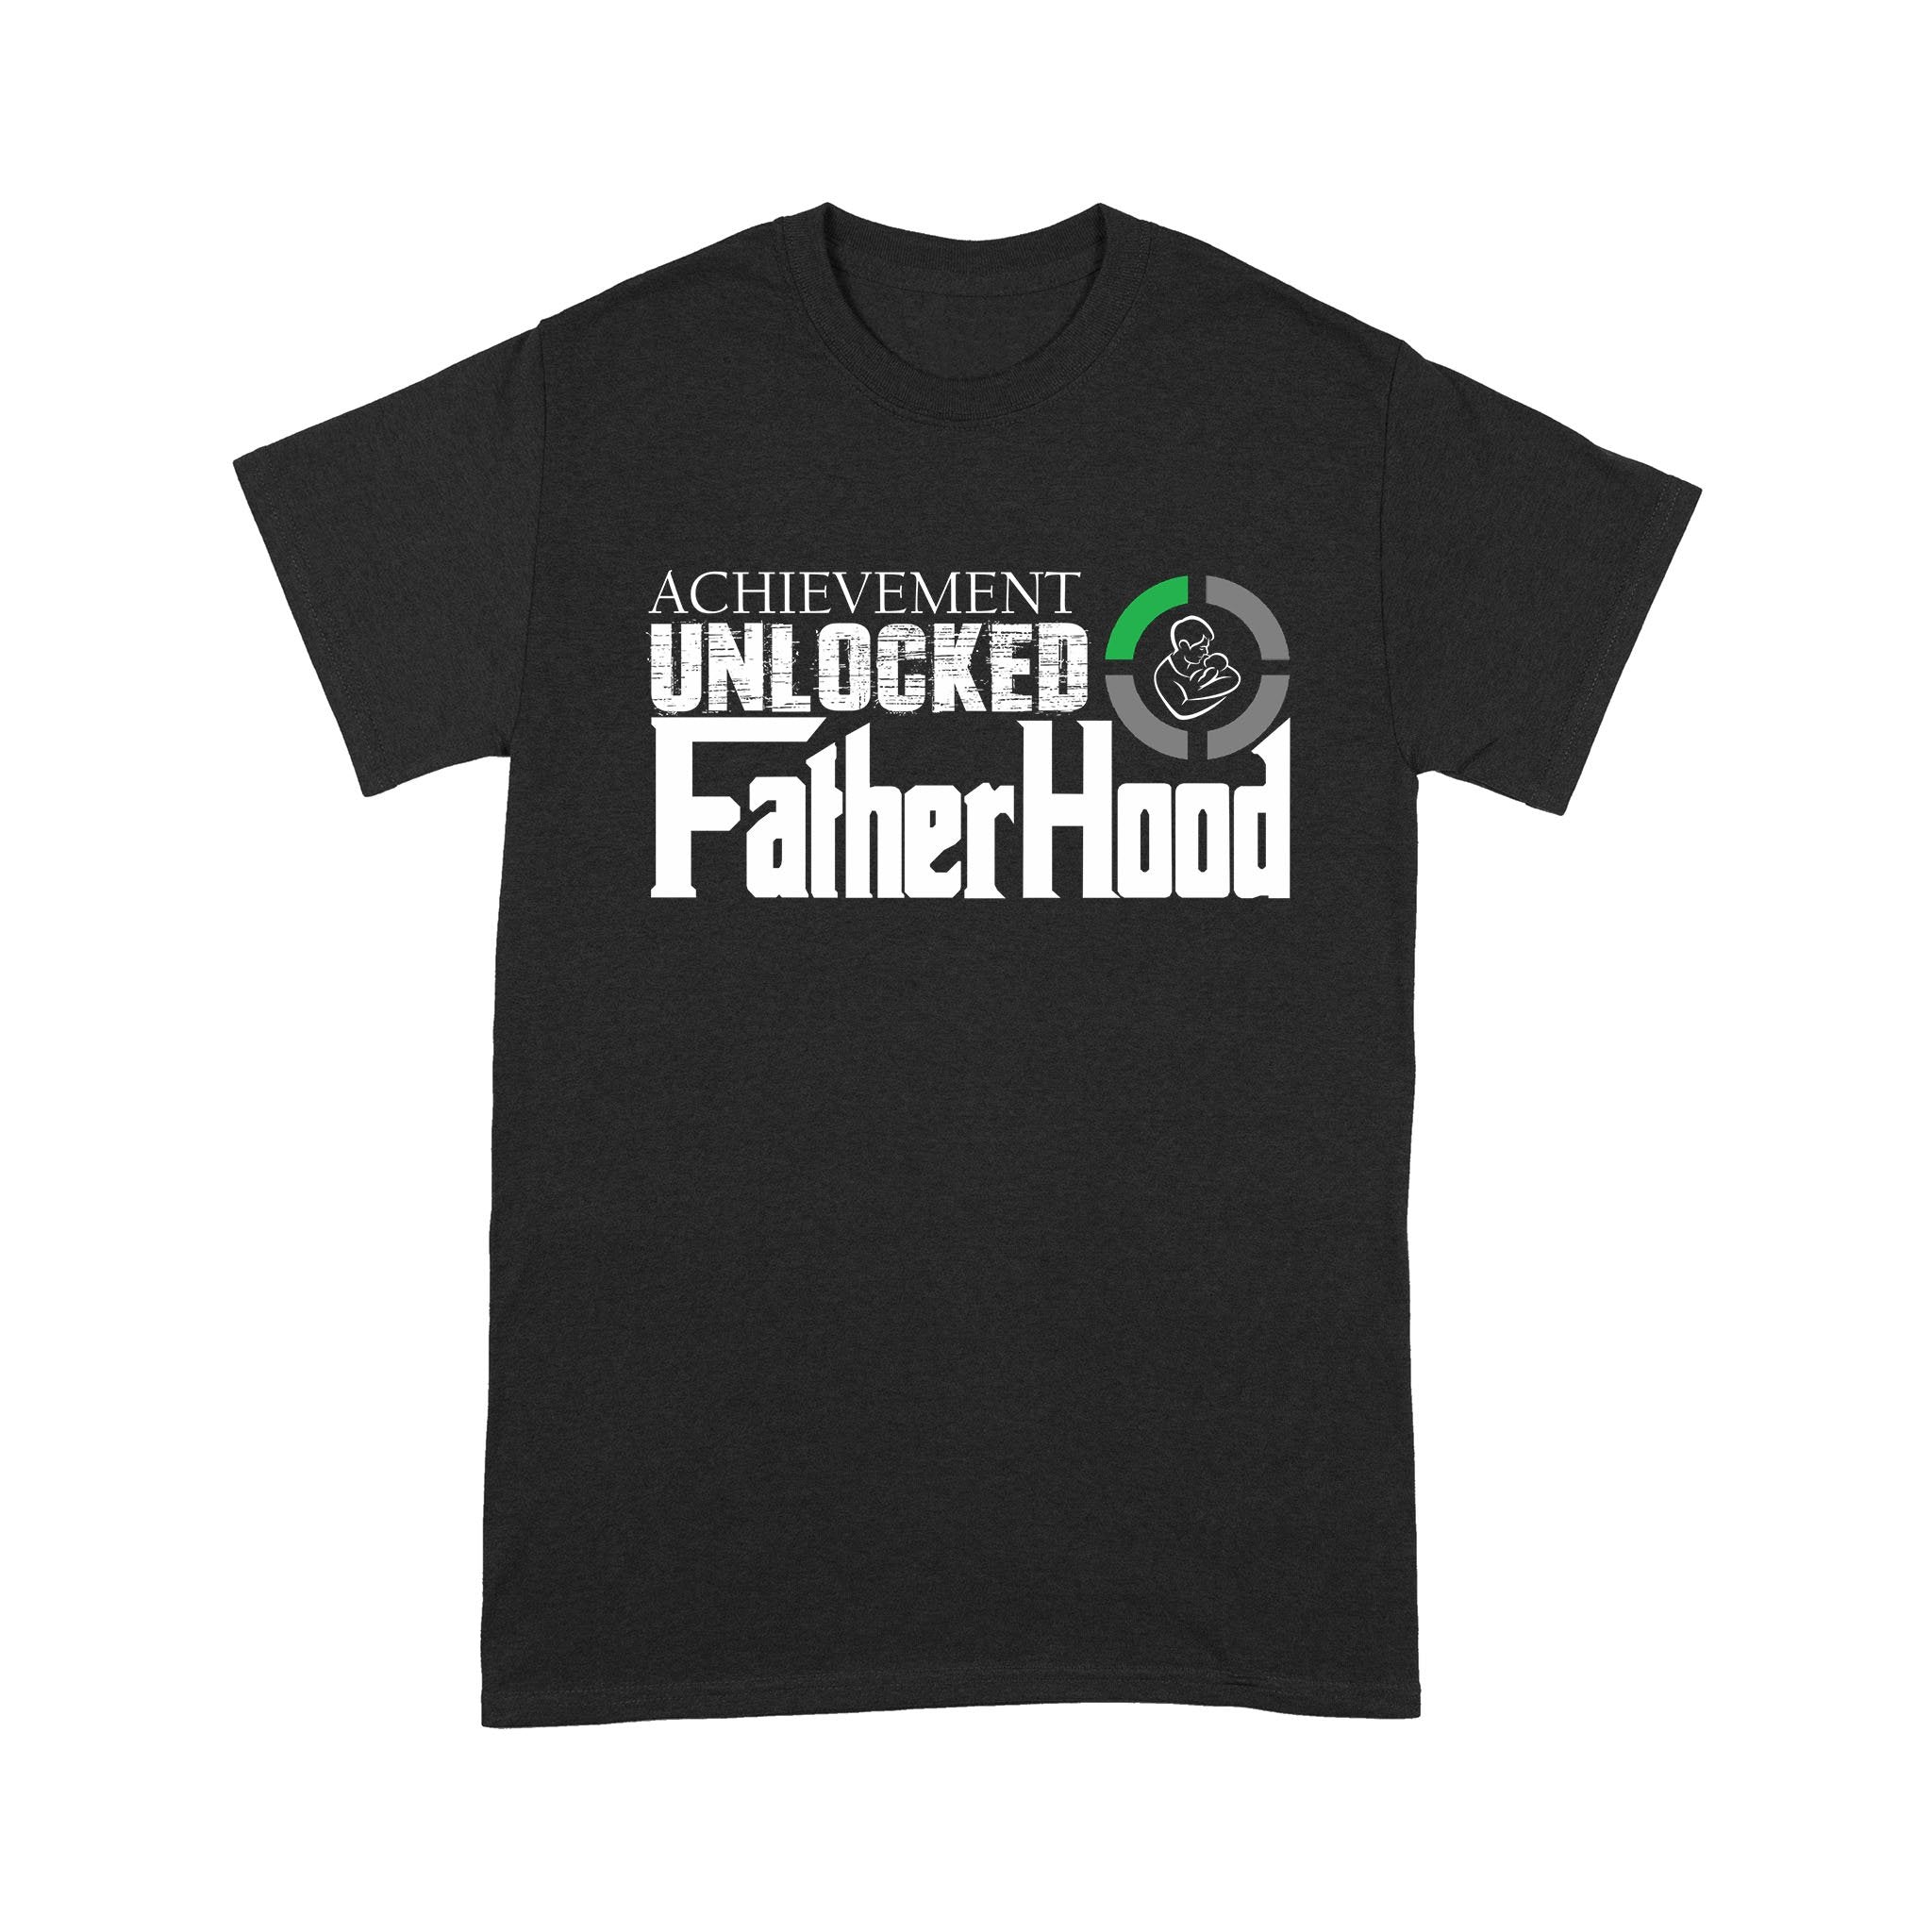 Best Gift For First-time Dad, Fathers' Day 2021, Achievement Unlocked Fatherhood T-shirt